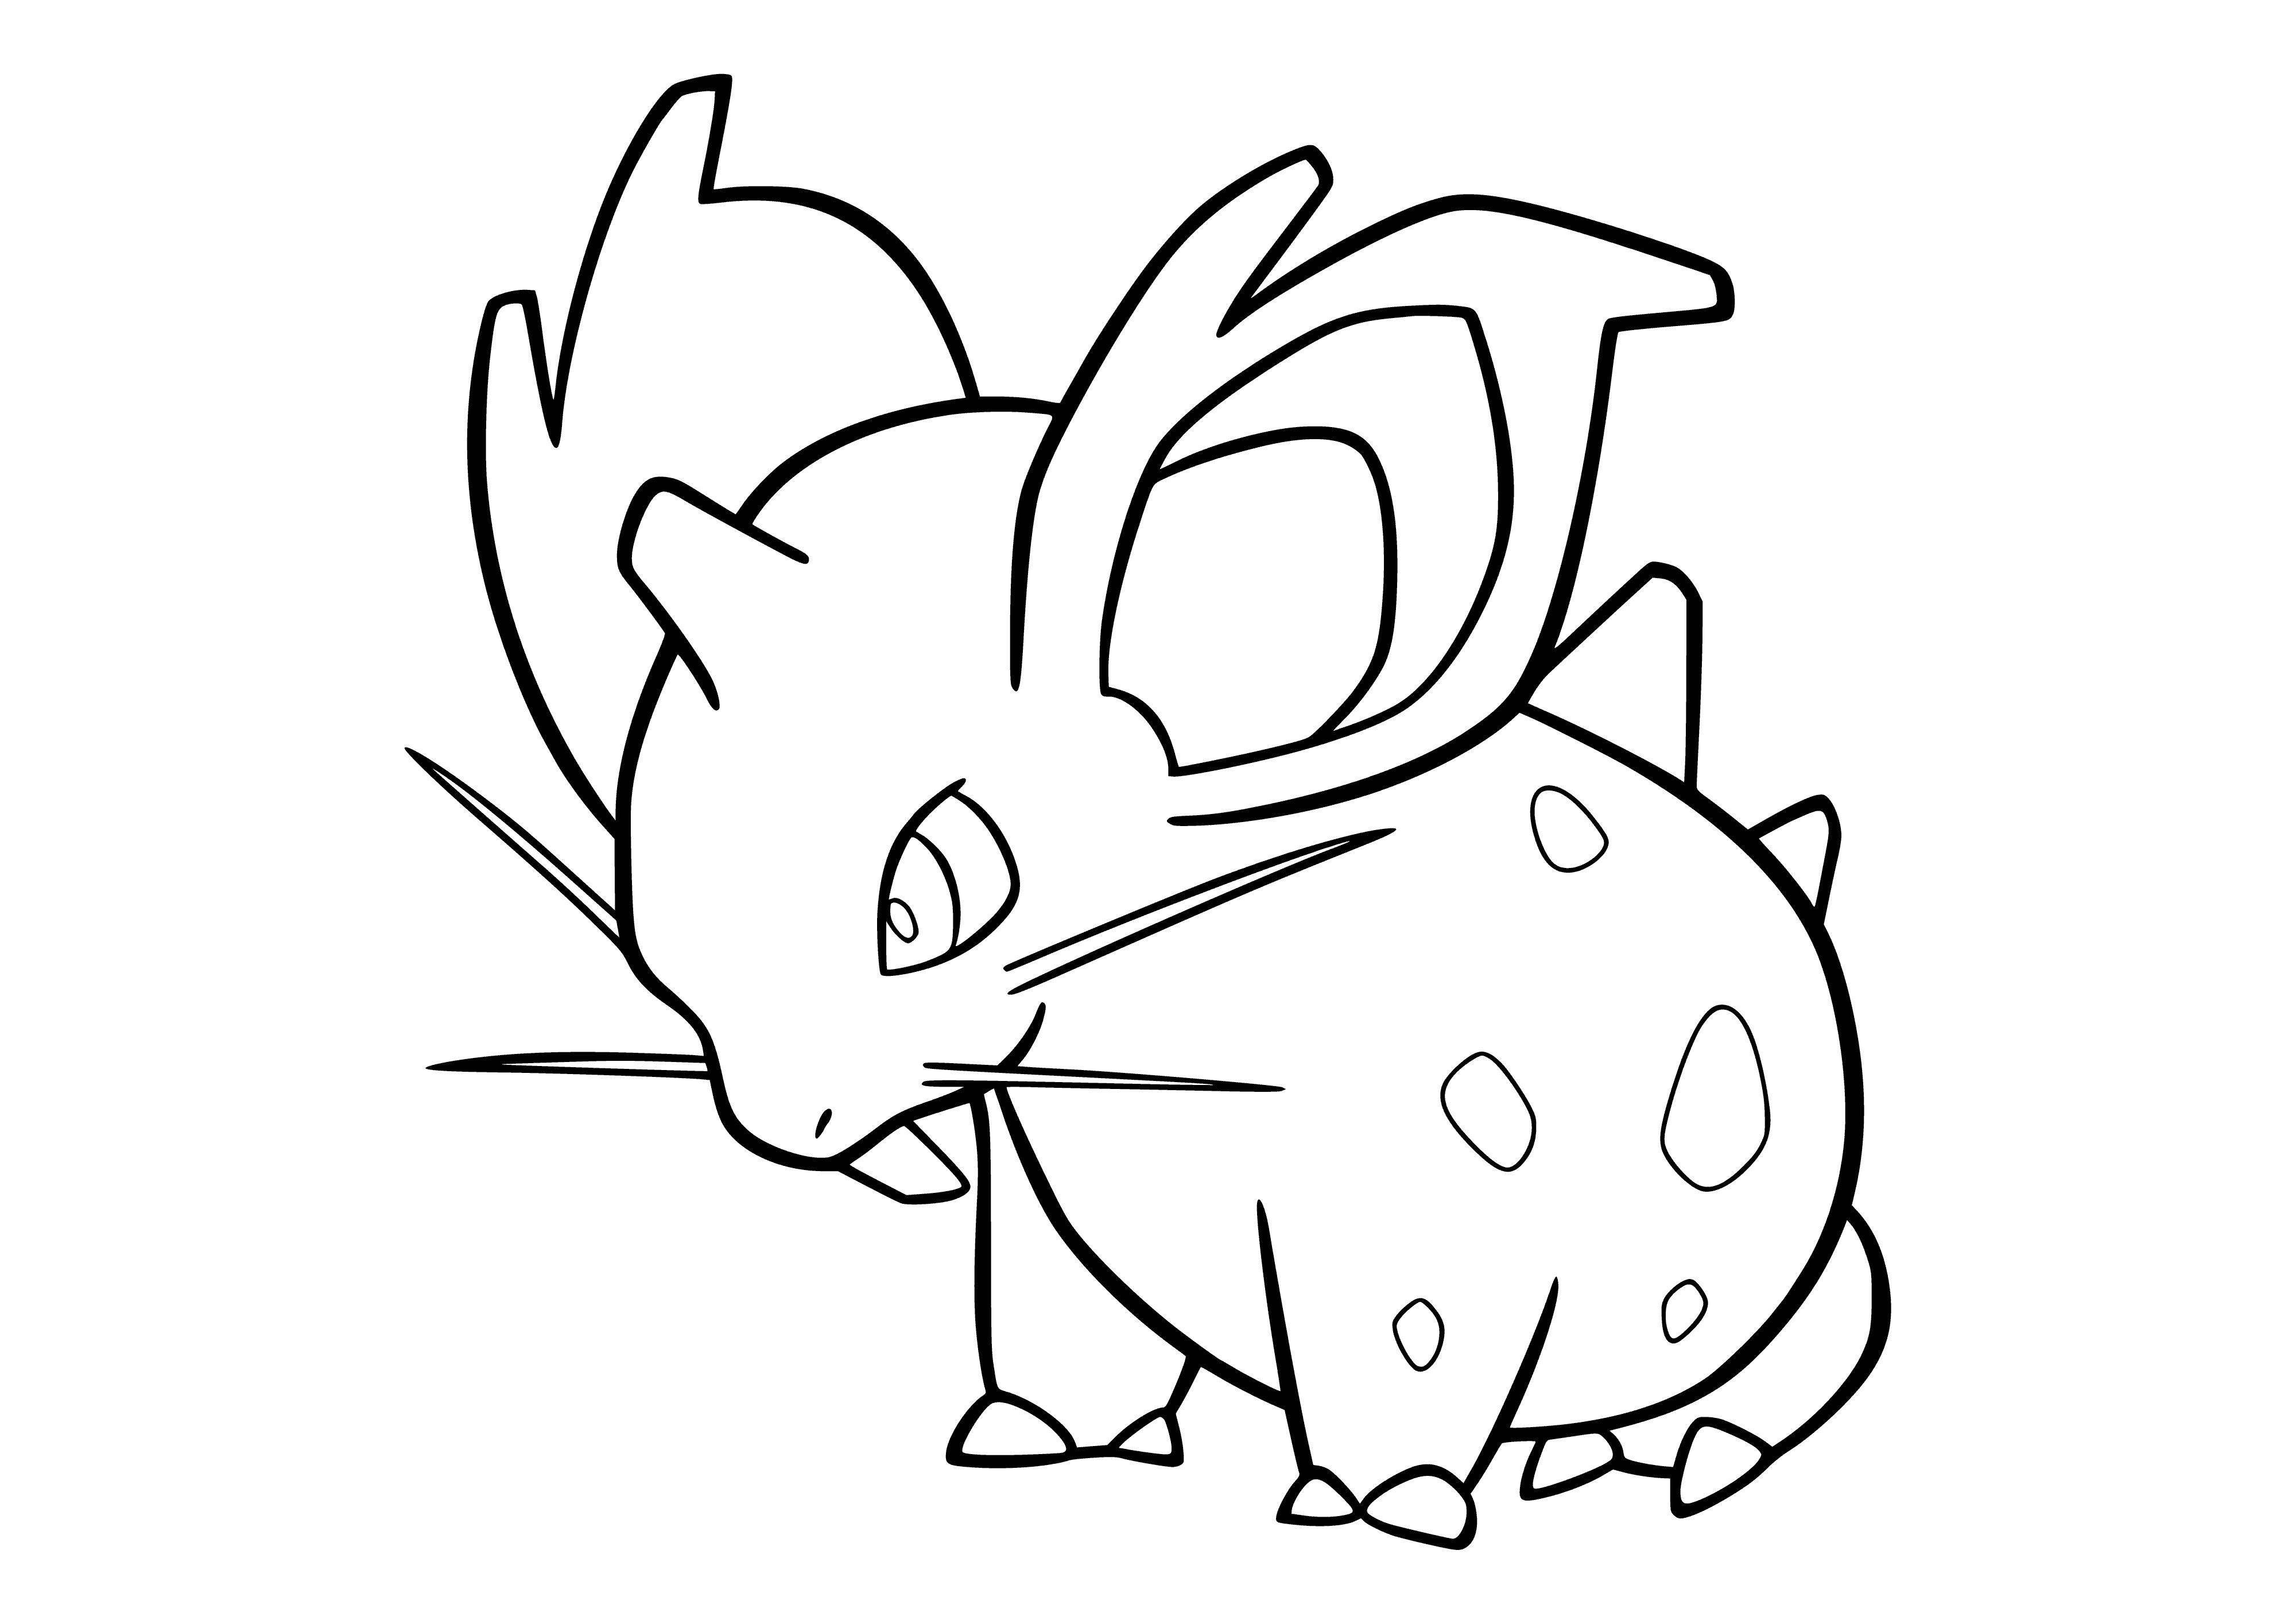 coloring page: Rodent-like Pokemon w/ large, pointed ears and toxic barb. Female has smaller horn & more gentle disposition.